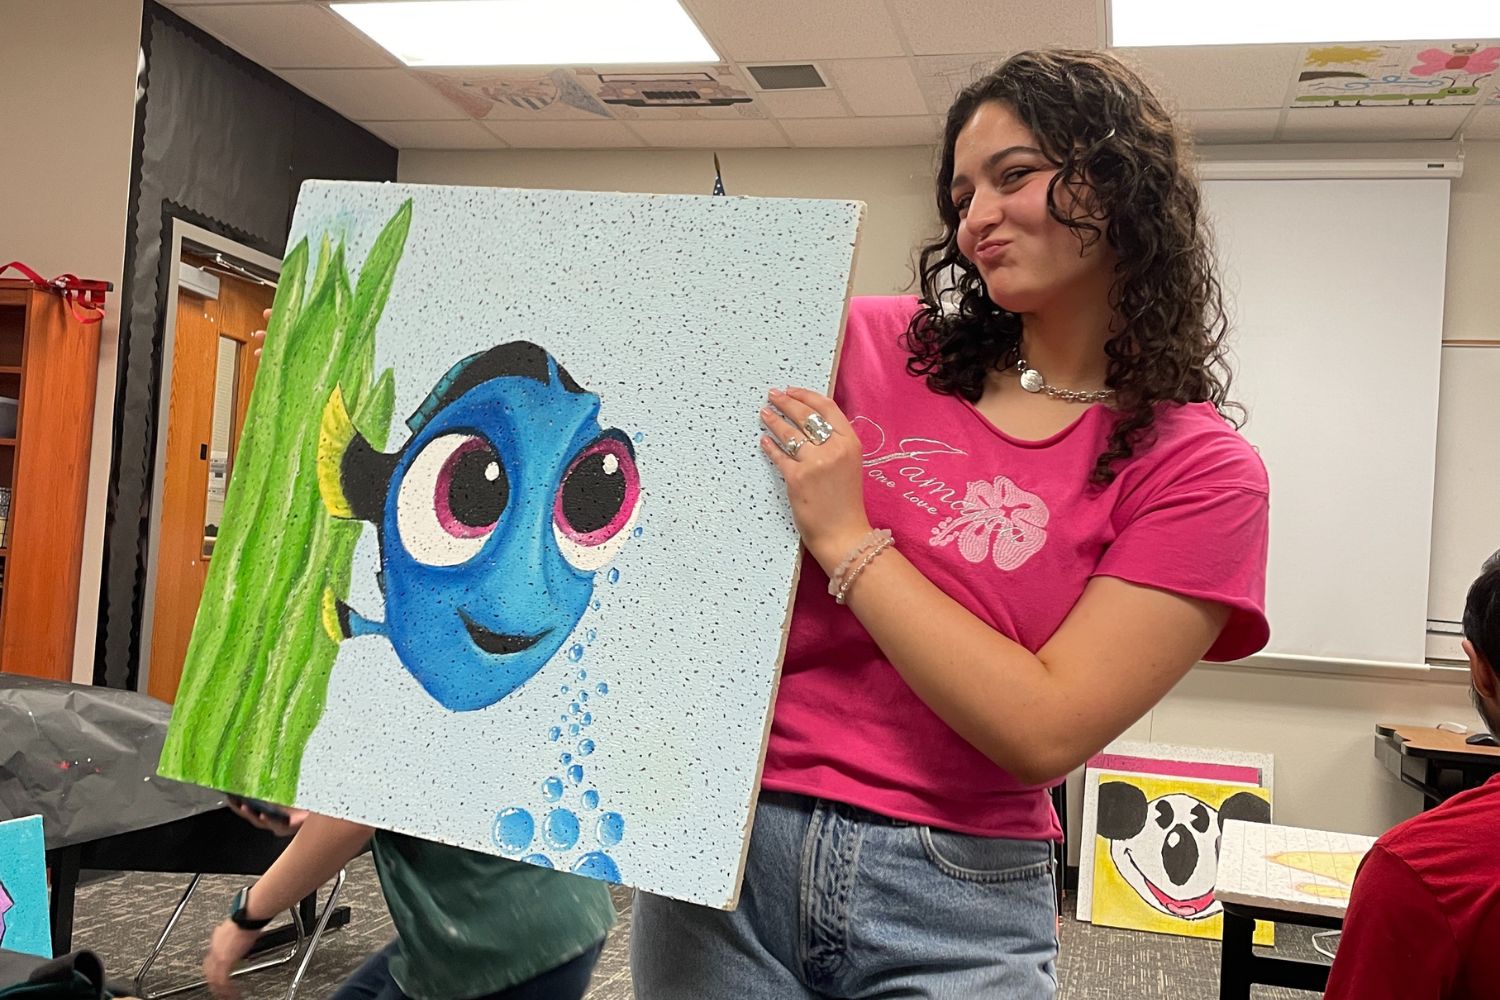 Senior Eva Soto (pictured) is one of many students who has painted and displayed a ceiling tile. “I loved walking around and seeing people’s ceiling tiles every year,” senior Eva Soto said. “When we did ours, we wanted it to be one that people really liked and thought was good, so we put a lot of effort into it to make it a good grade but also looking really appealing.”